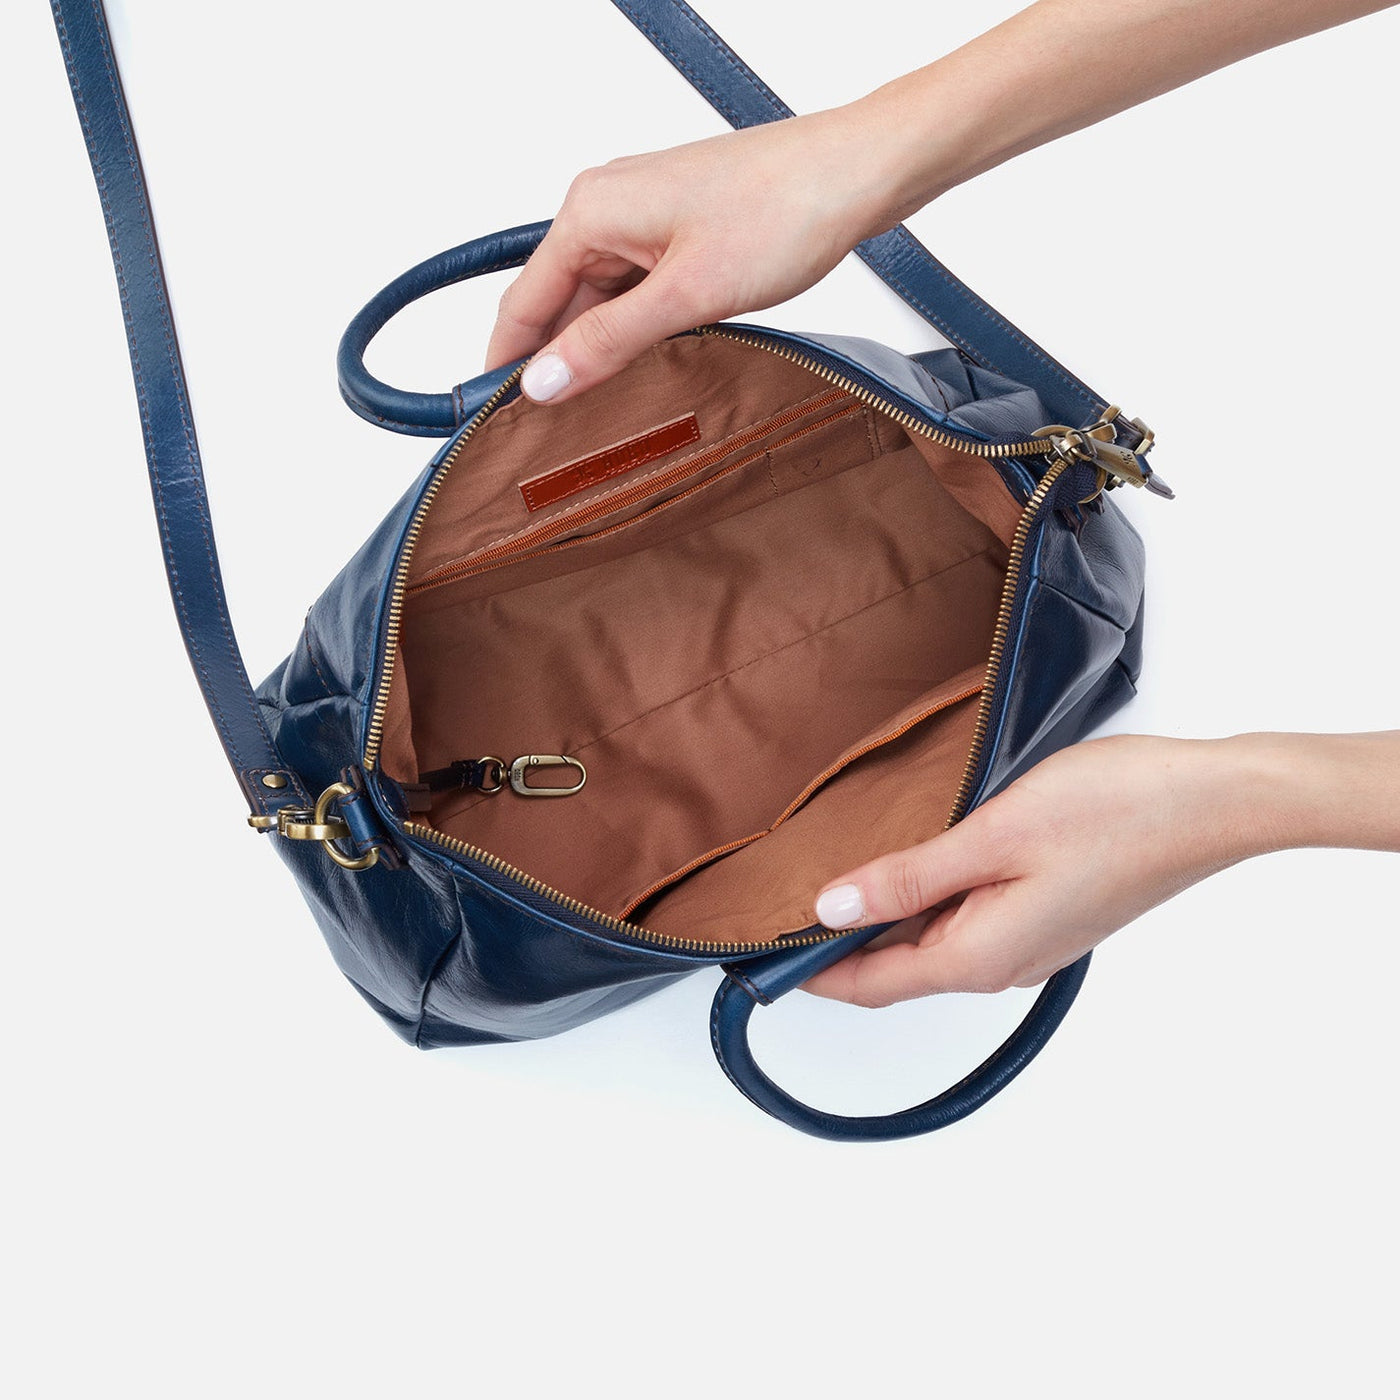 Longchamp Le Pliage Cuir Backpack in Honey Just Arrived -- Thoughts?